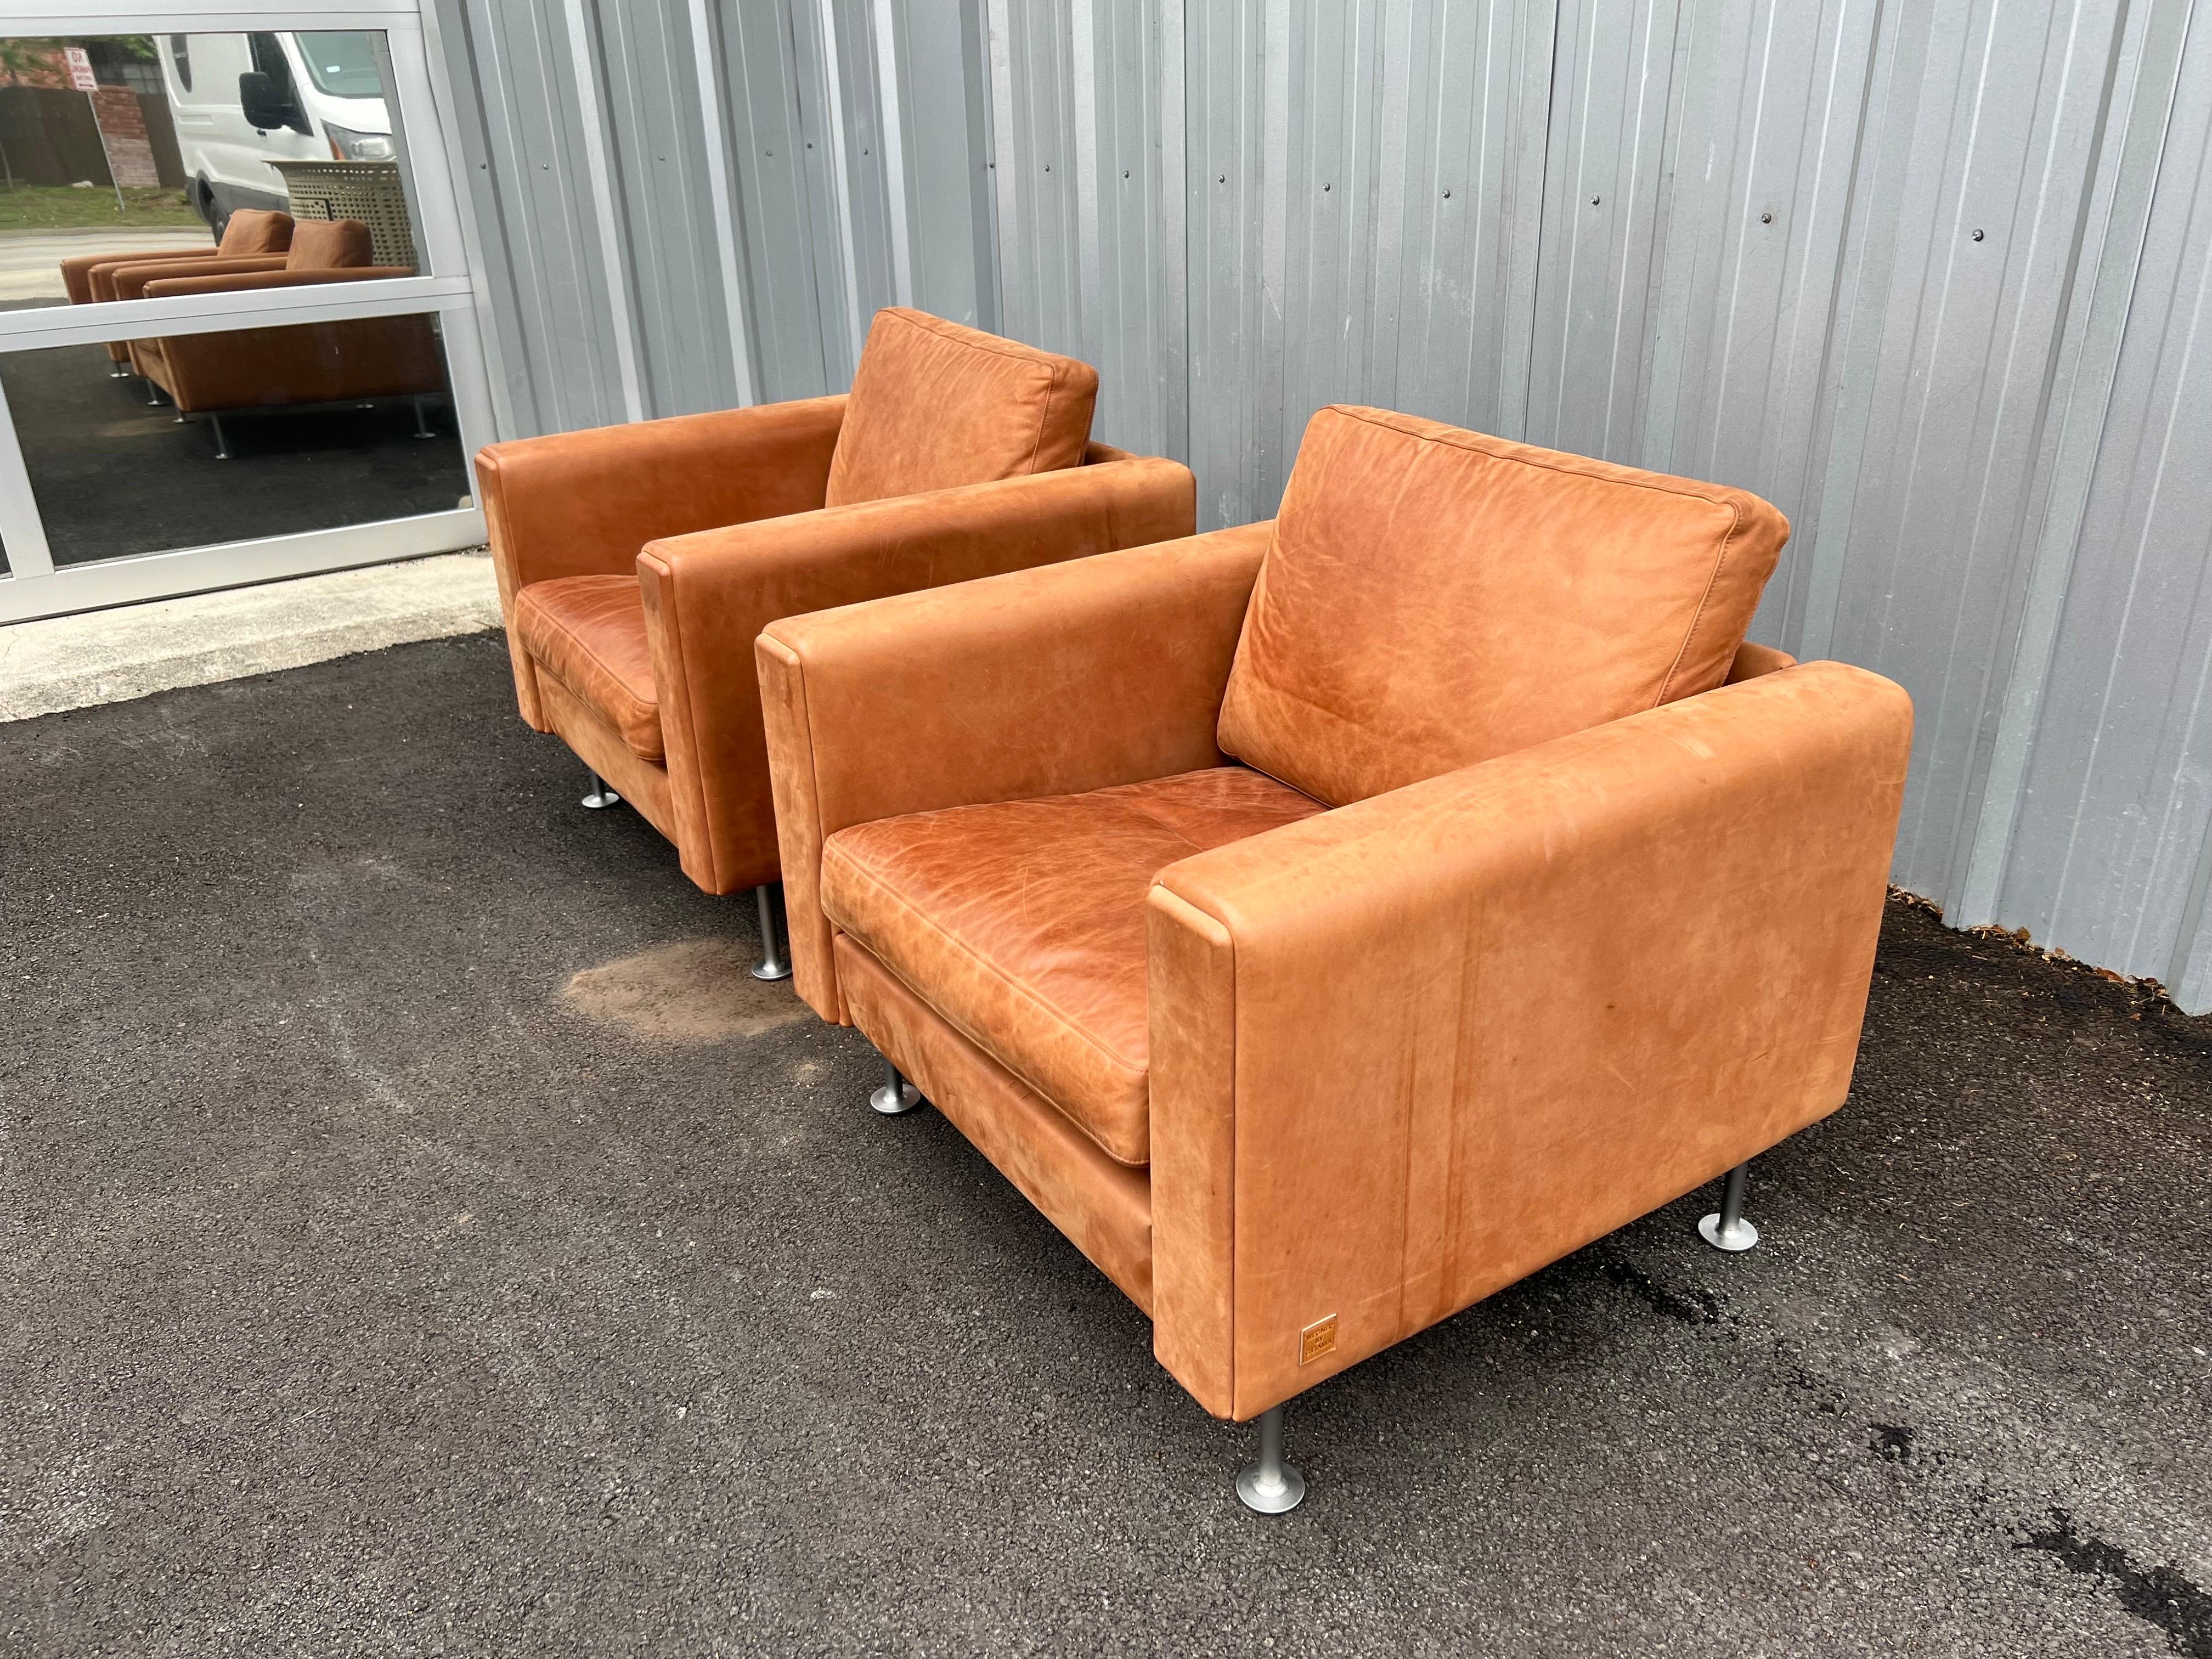 Stunning pair of Danish modern Hans Wegner for Getama, Century 2000 lounge chairs are in a cognac color with steel legs and made in 2018. This design was one of Wegner’s final works. The Century 2000 chairs are hand built at Getama’s factory in